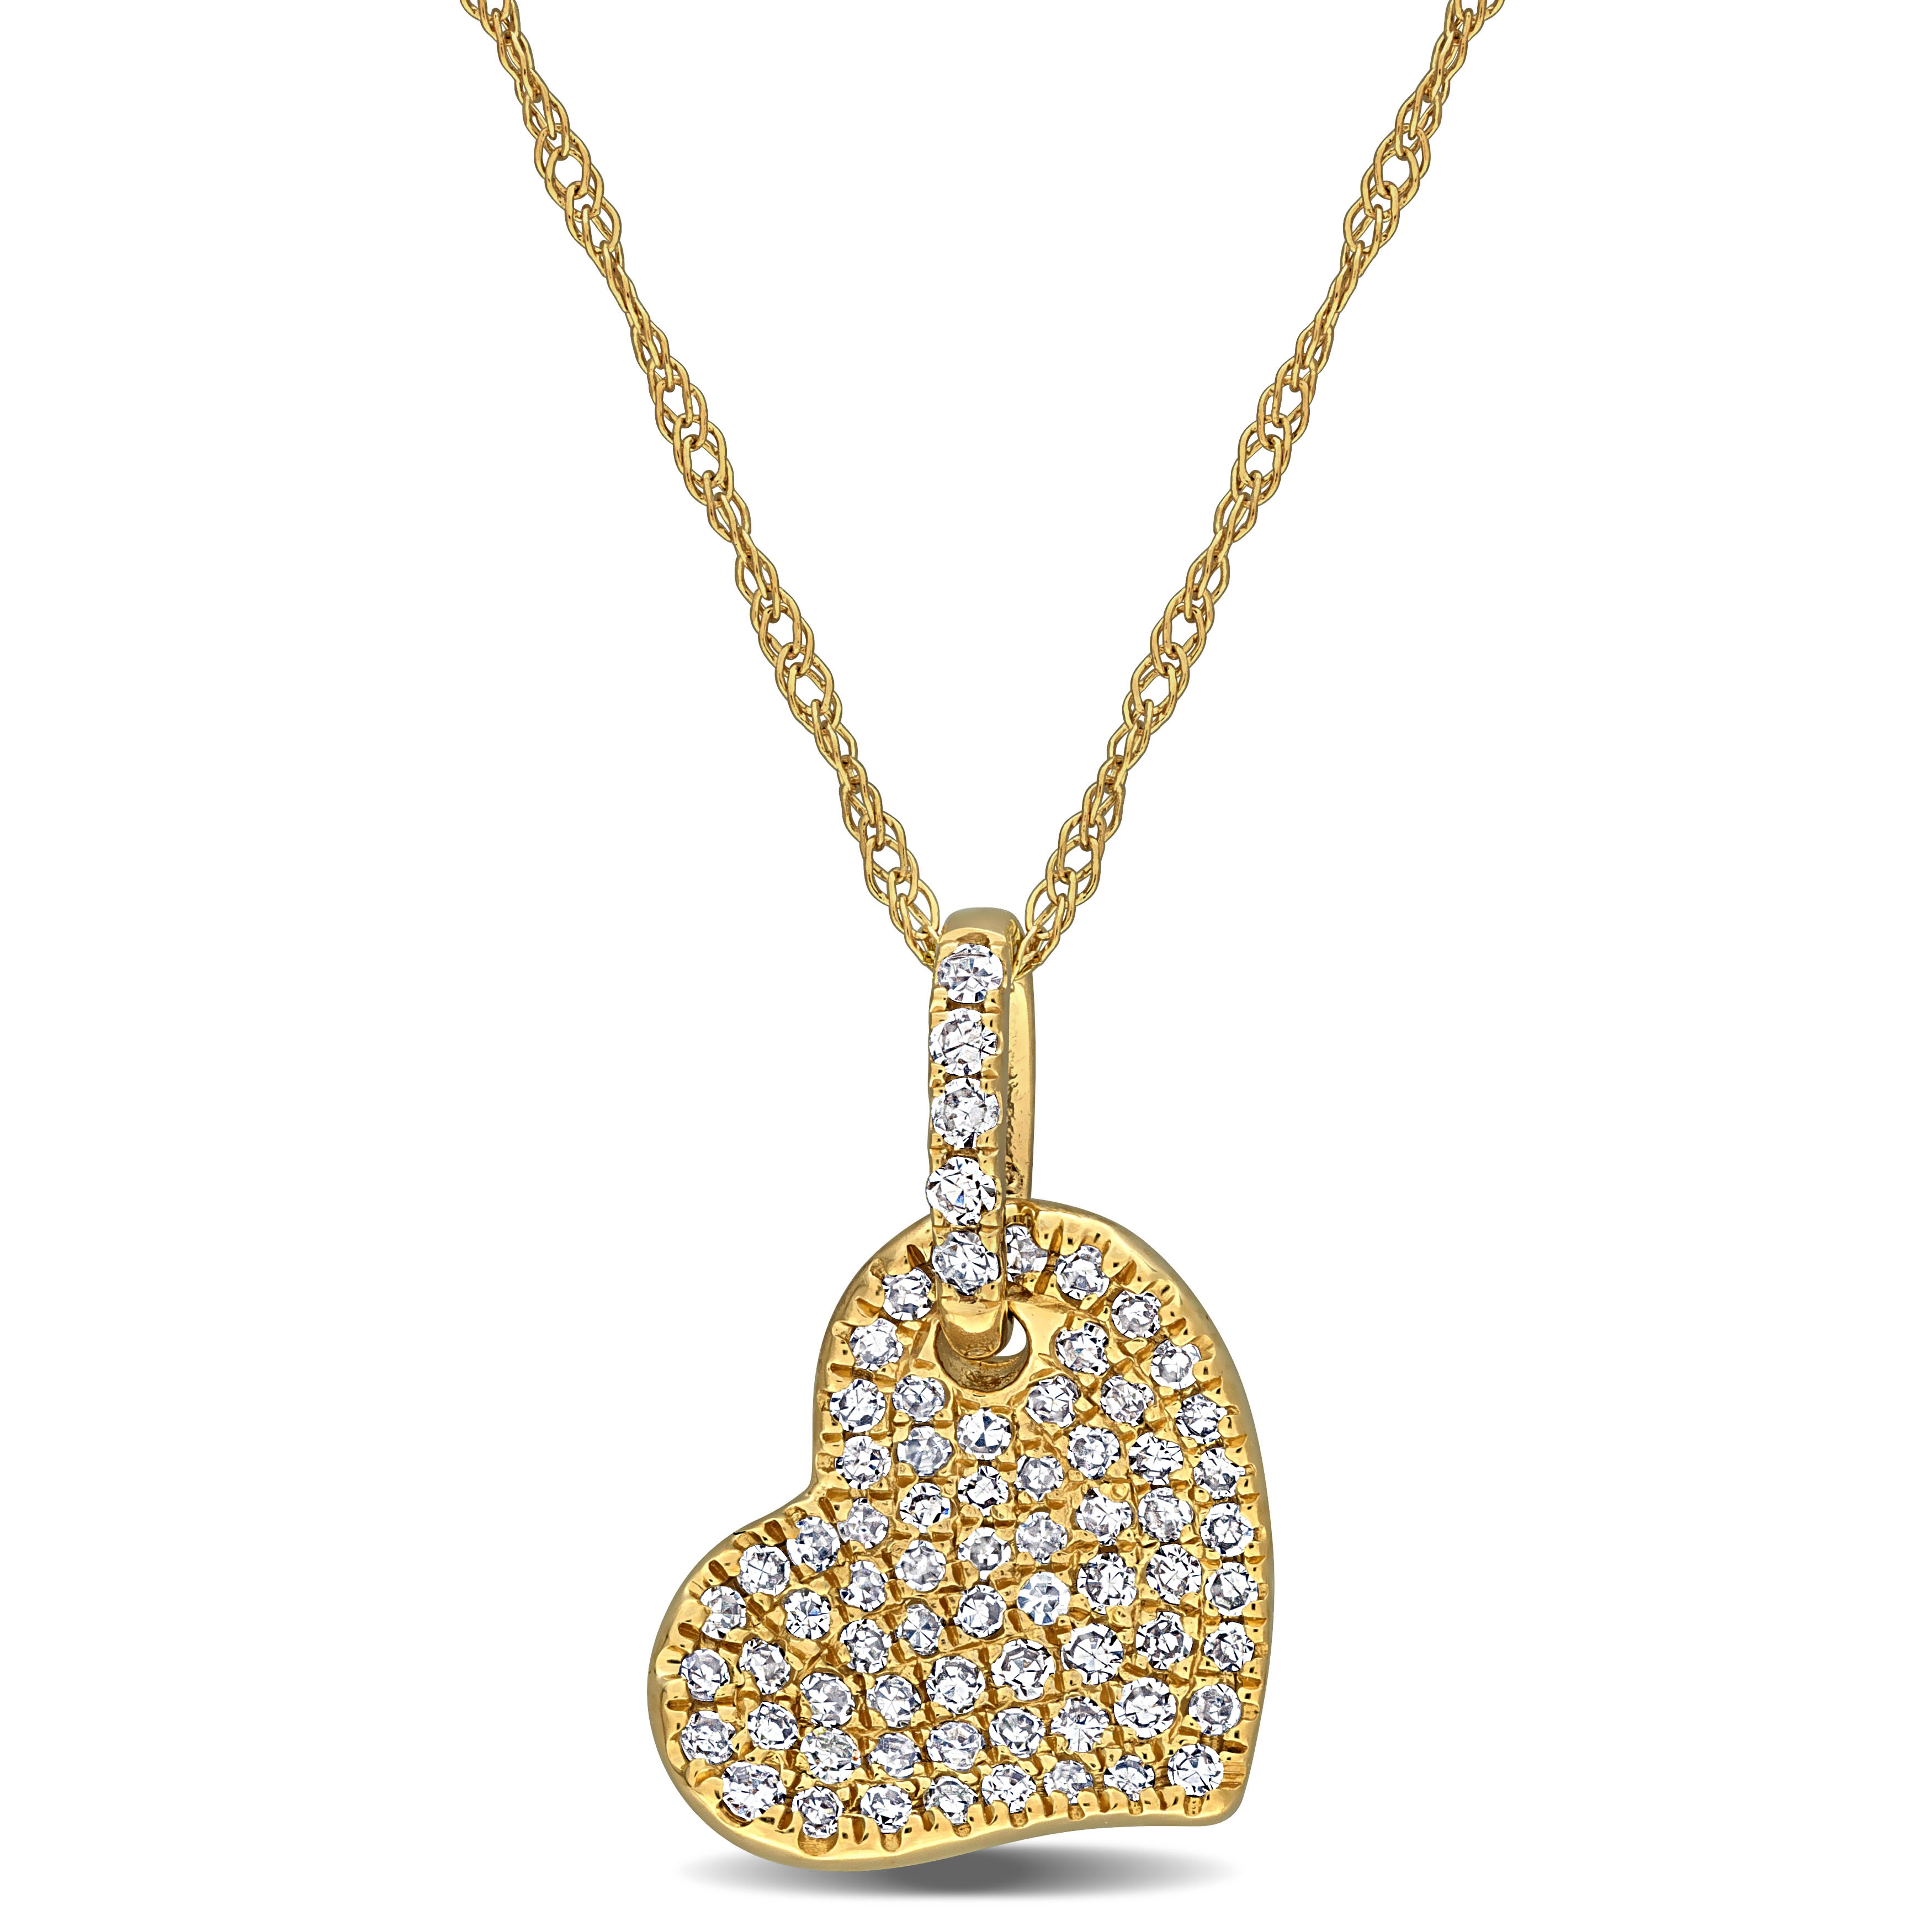 1/4 CT TW Pave Diamond Heart Pendant with Chain in 14k Yellow Gold